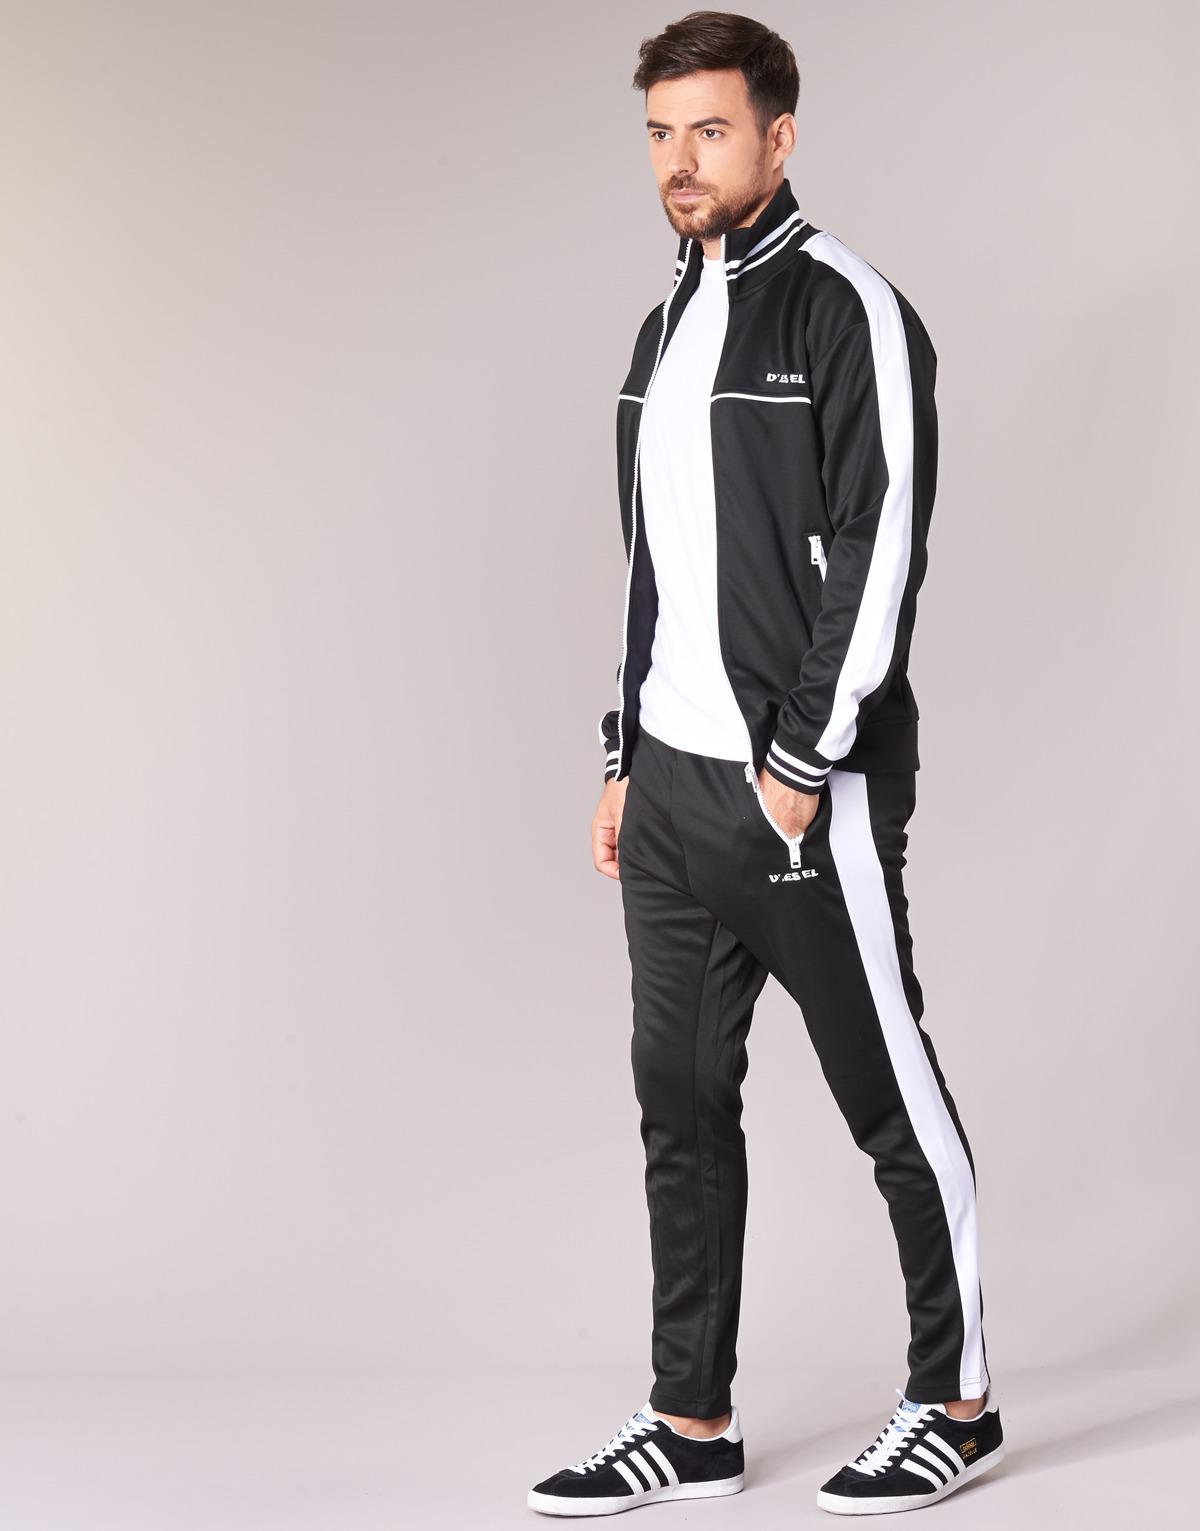 roots tracksuit price